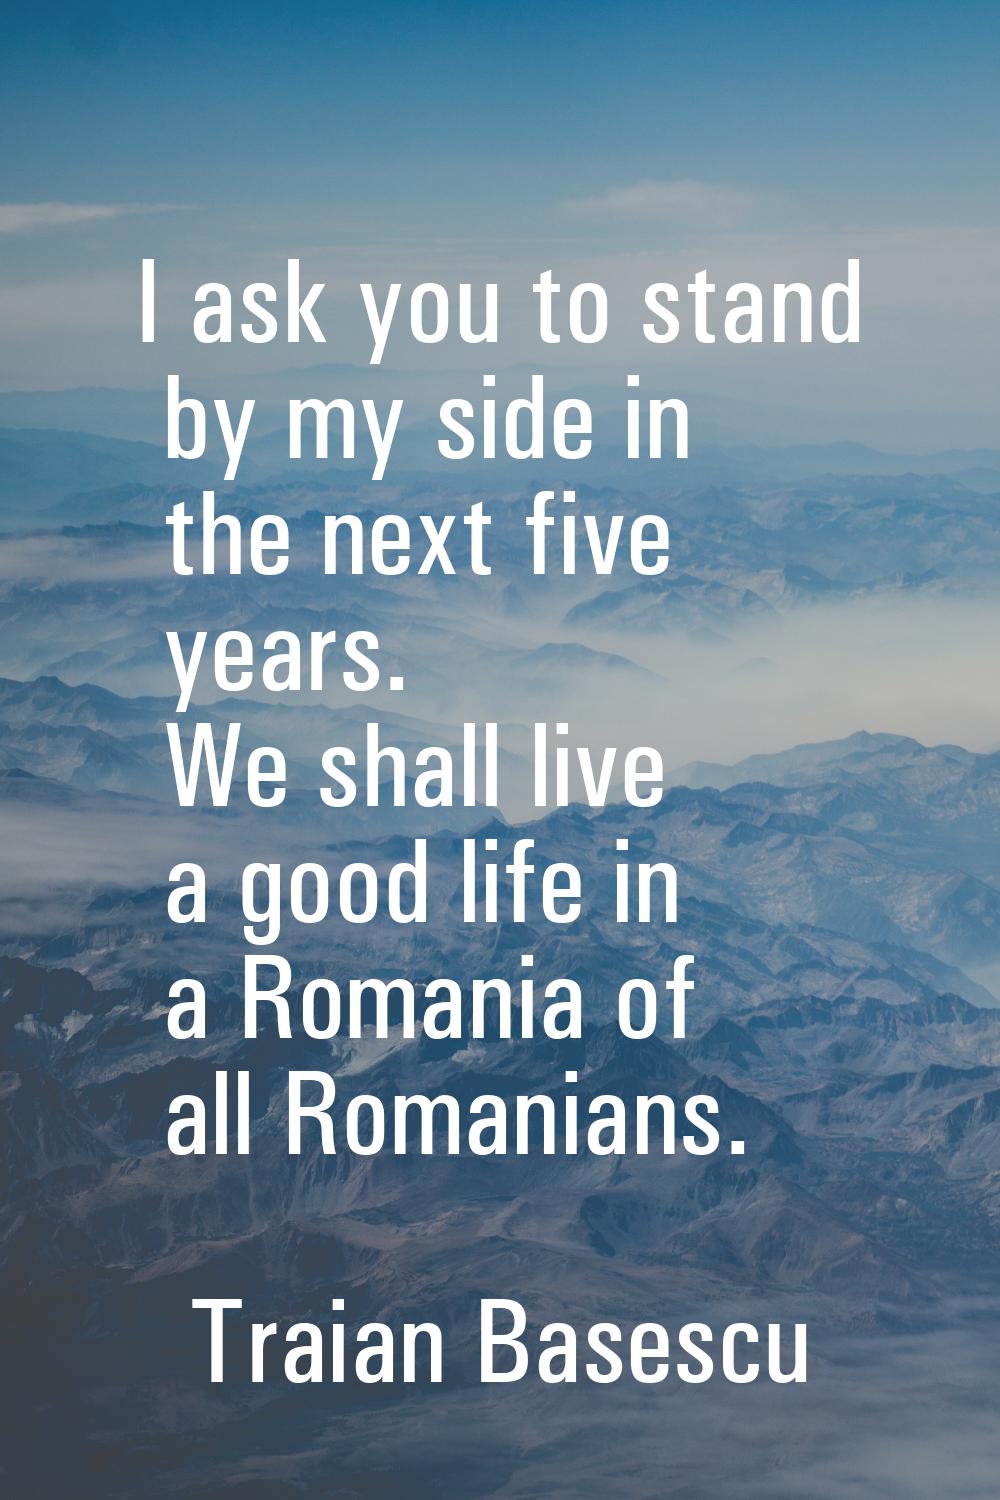 I ask you to stand by my side in the next five years. We shall live a good life in a Romania of all